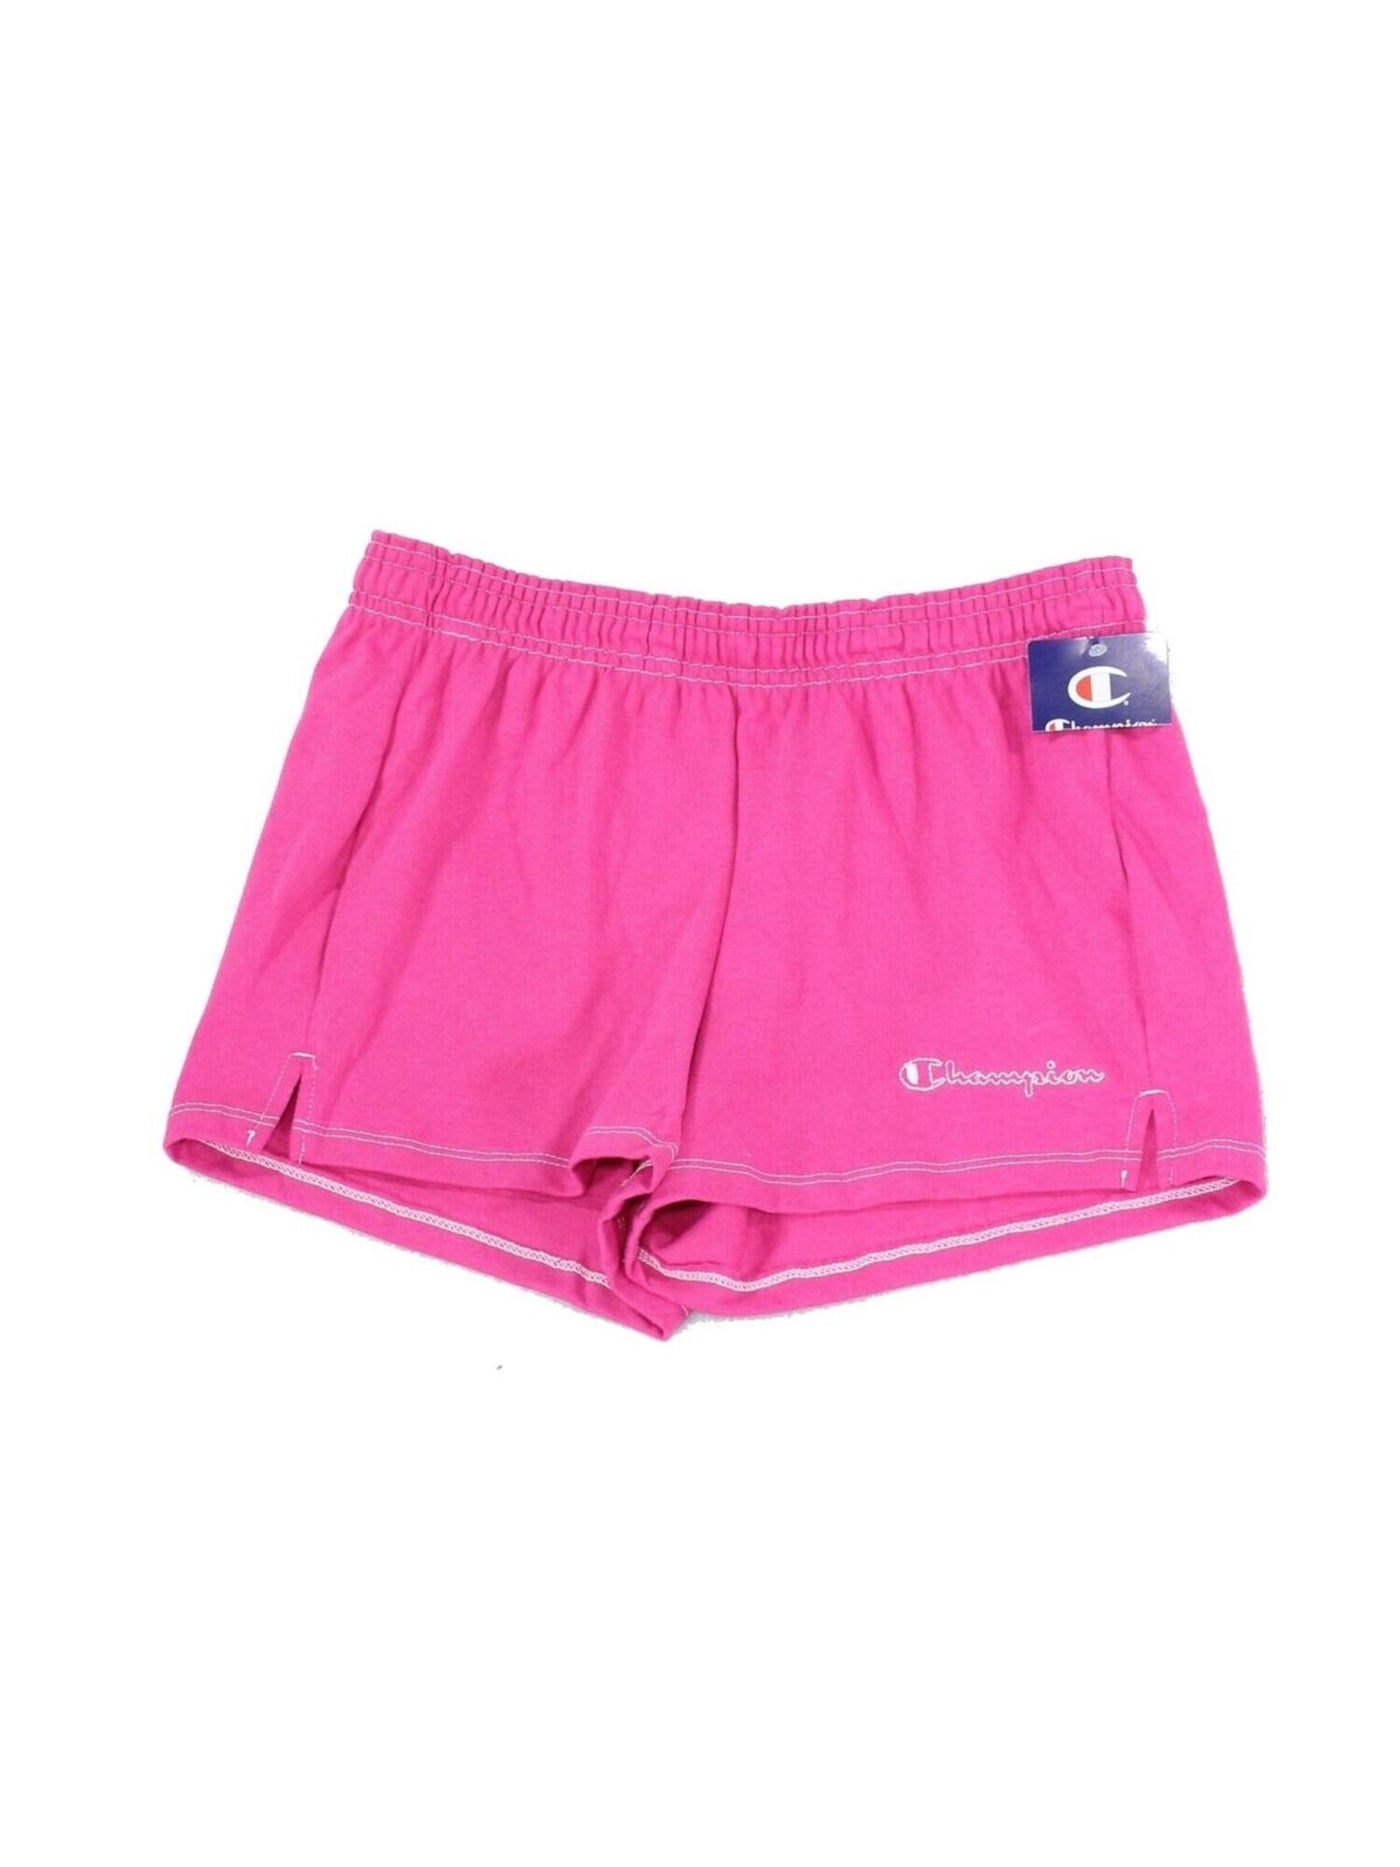 CHAMPION Womens Stretch Active Wear Shorts